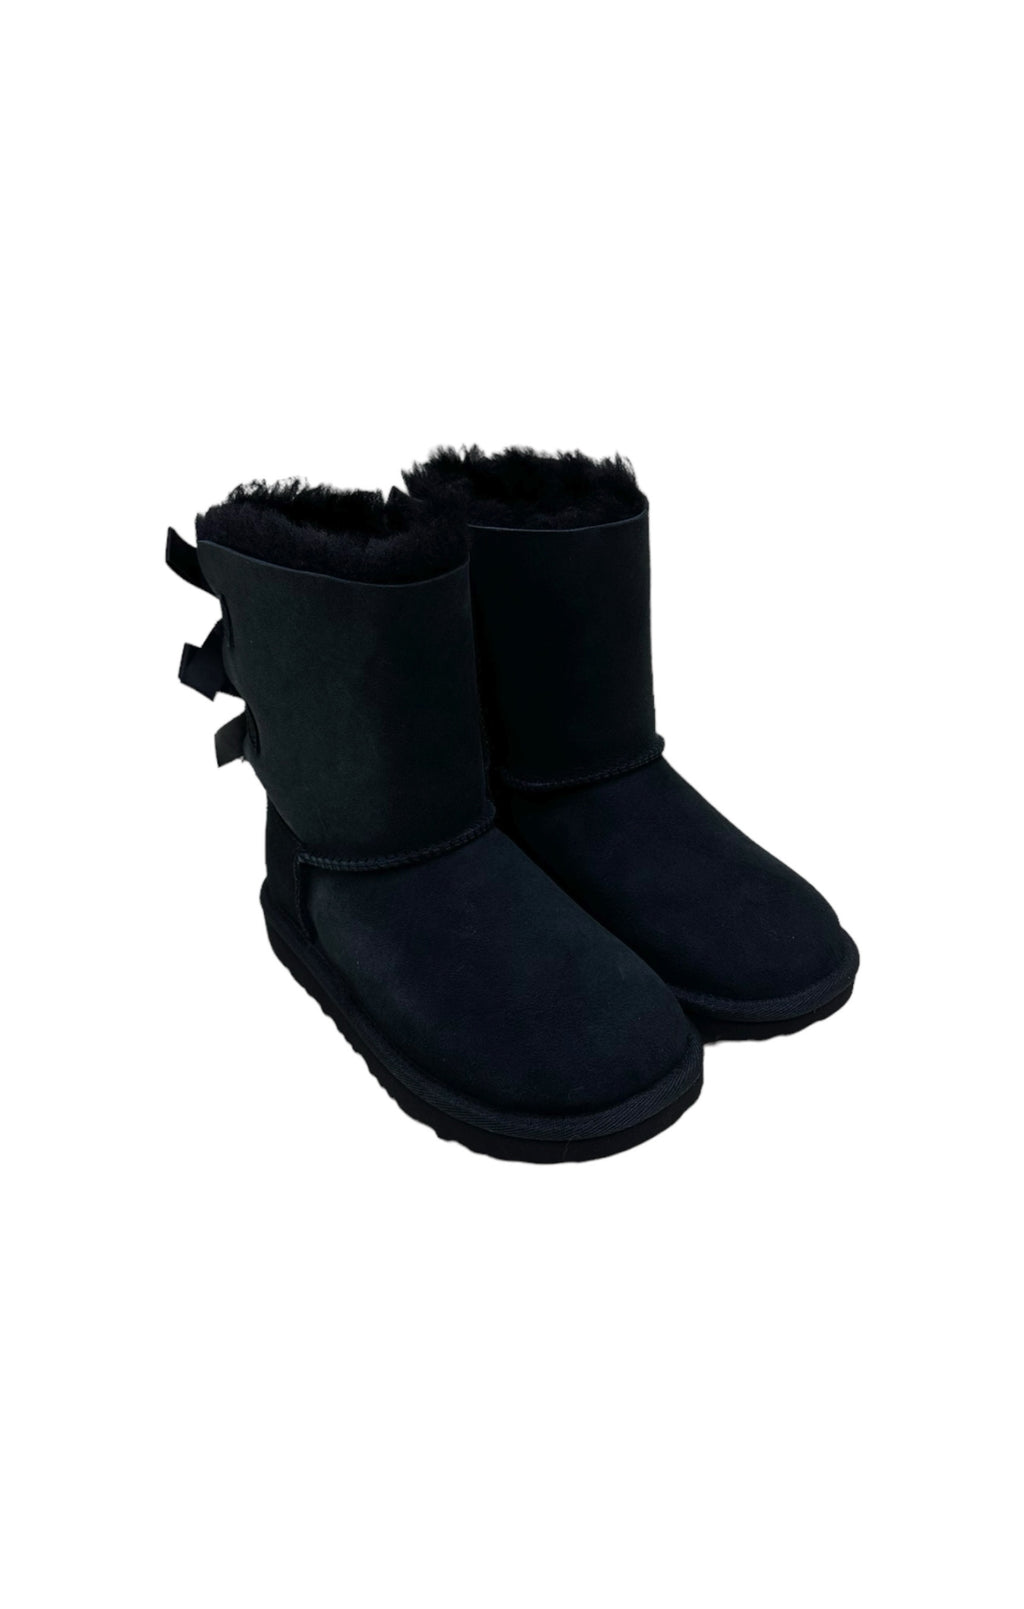 UGG (NEW) Boots Size: Youth 1